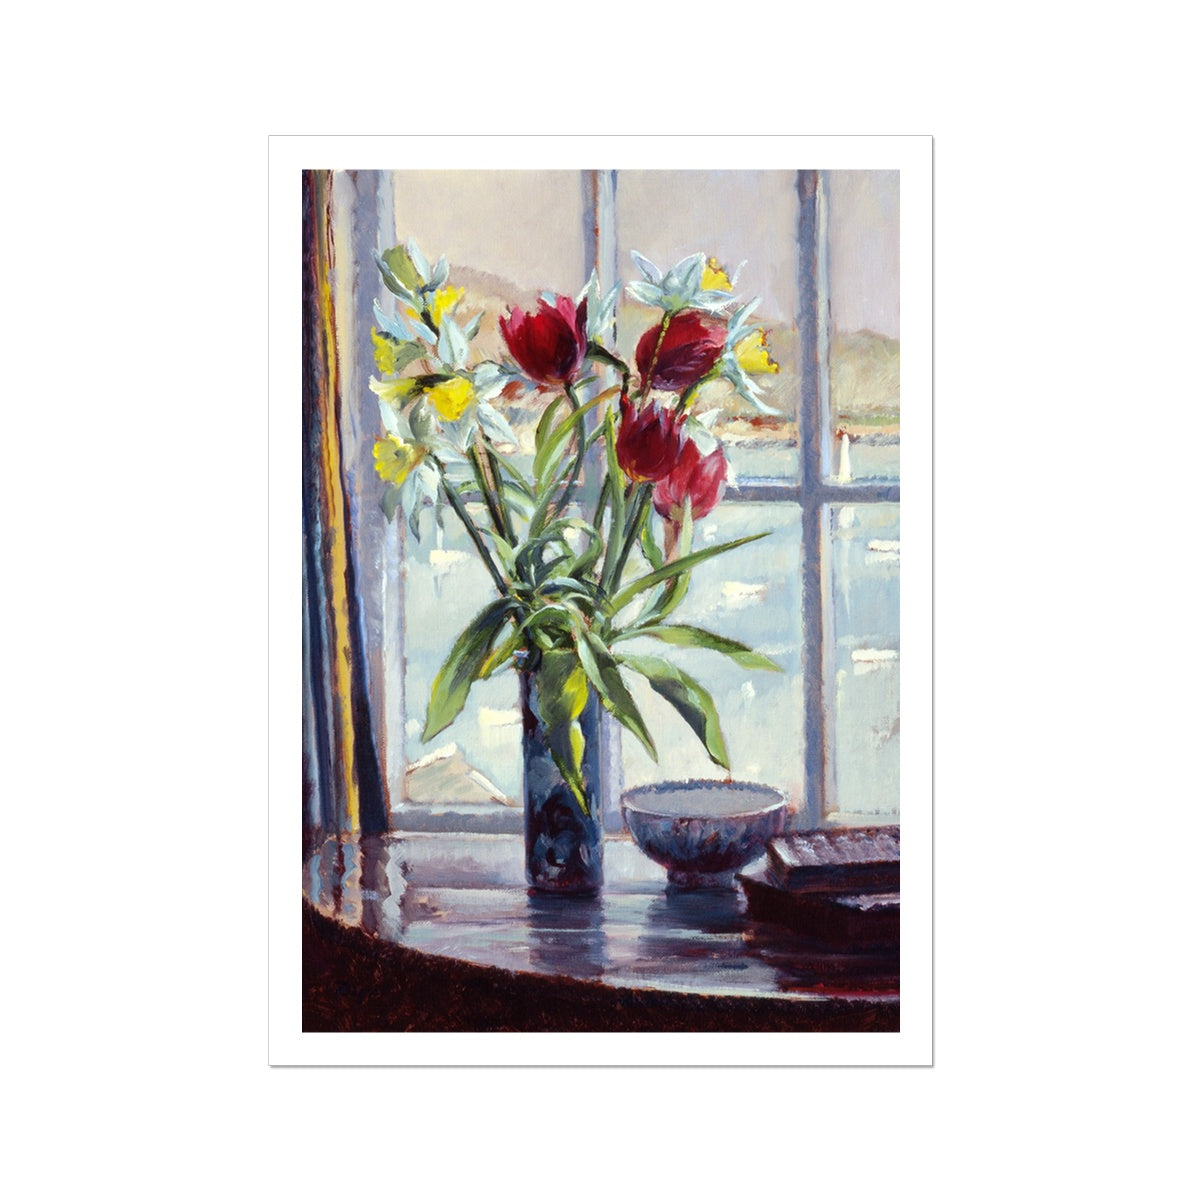 Ted Dyer Fine Art Print. Open Edition Cornish Art Print. 'Daffodils and Tulips in a Vase, Still Life'. Cornwall Art Gallery